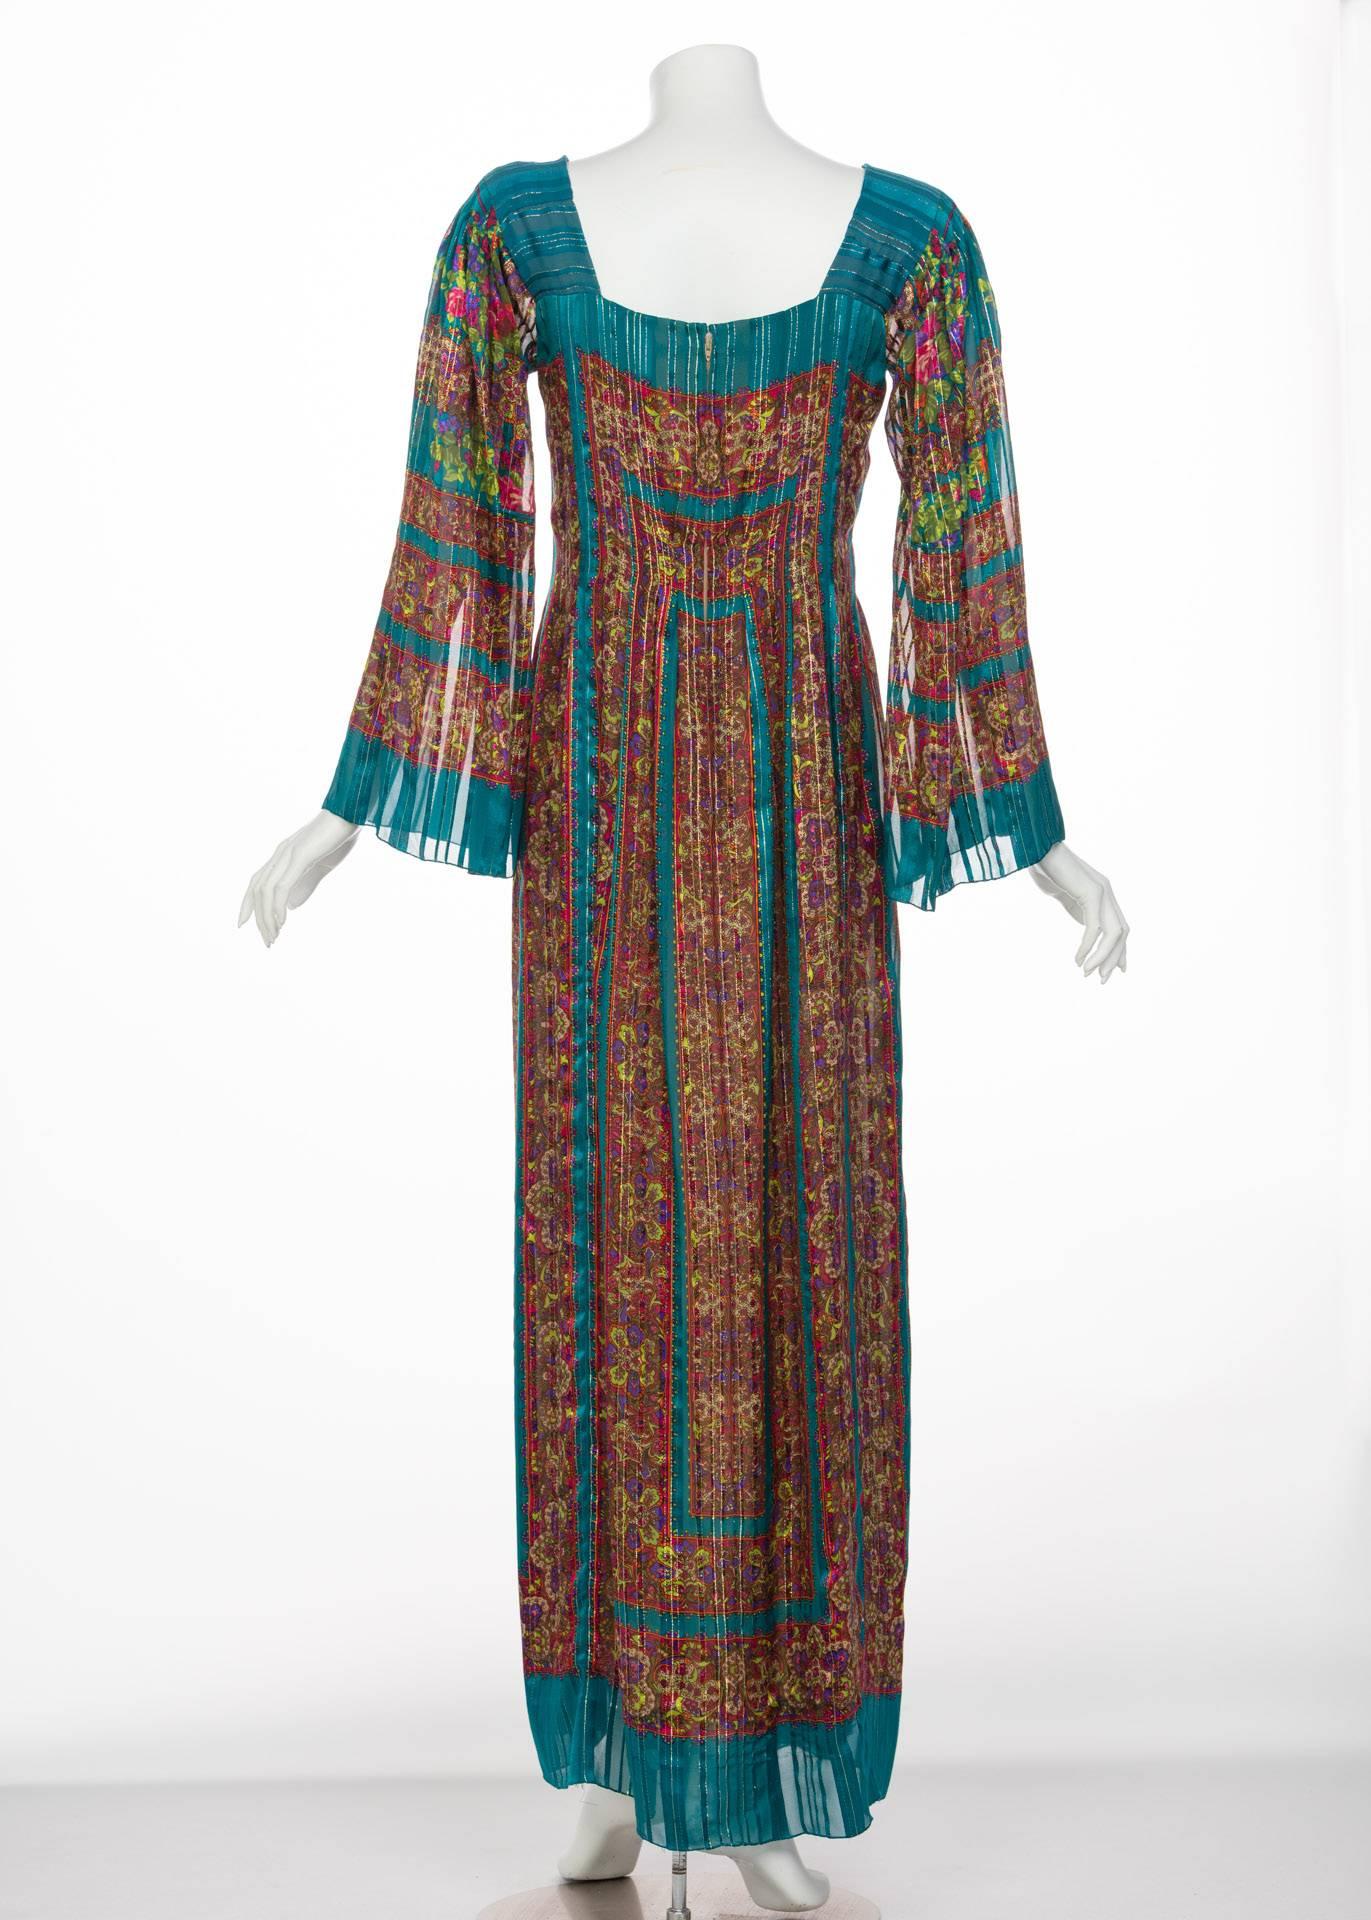 Pauline Trigere Silk Floral Metallic Bell Sleeve Caftan Maxi Dress, 1970s In Excellent Condition In Boca Raton, FL